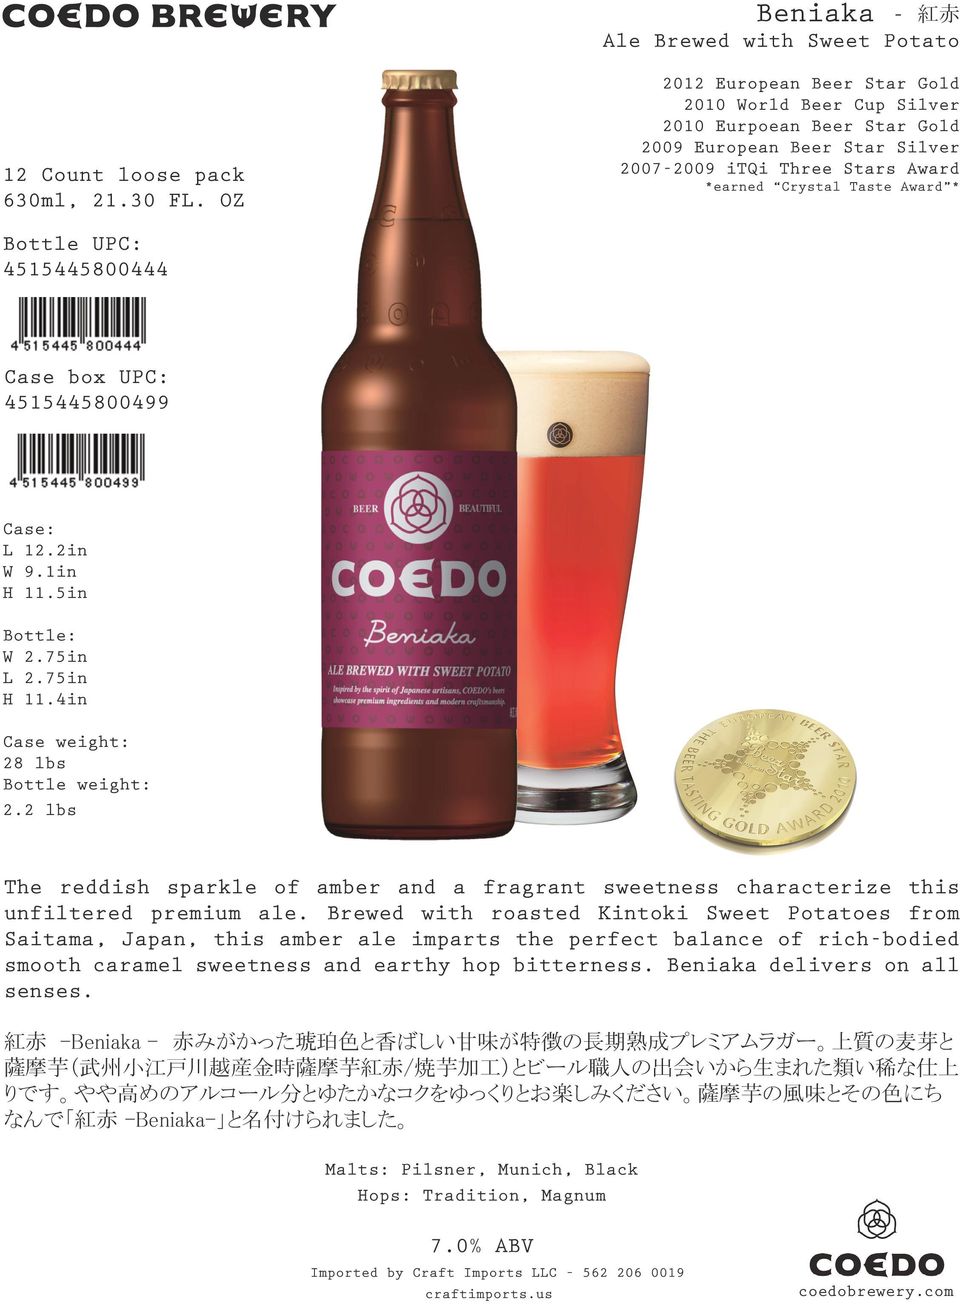 Brewed with roasted Kintoki Sweet Potatoes from Saitama, Japan, this amber ale imparts the perfect balance of rich-bodied smooth caramel sweetness and earthy hop bitterness.